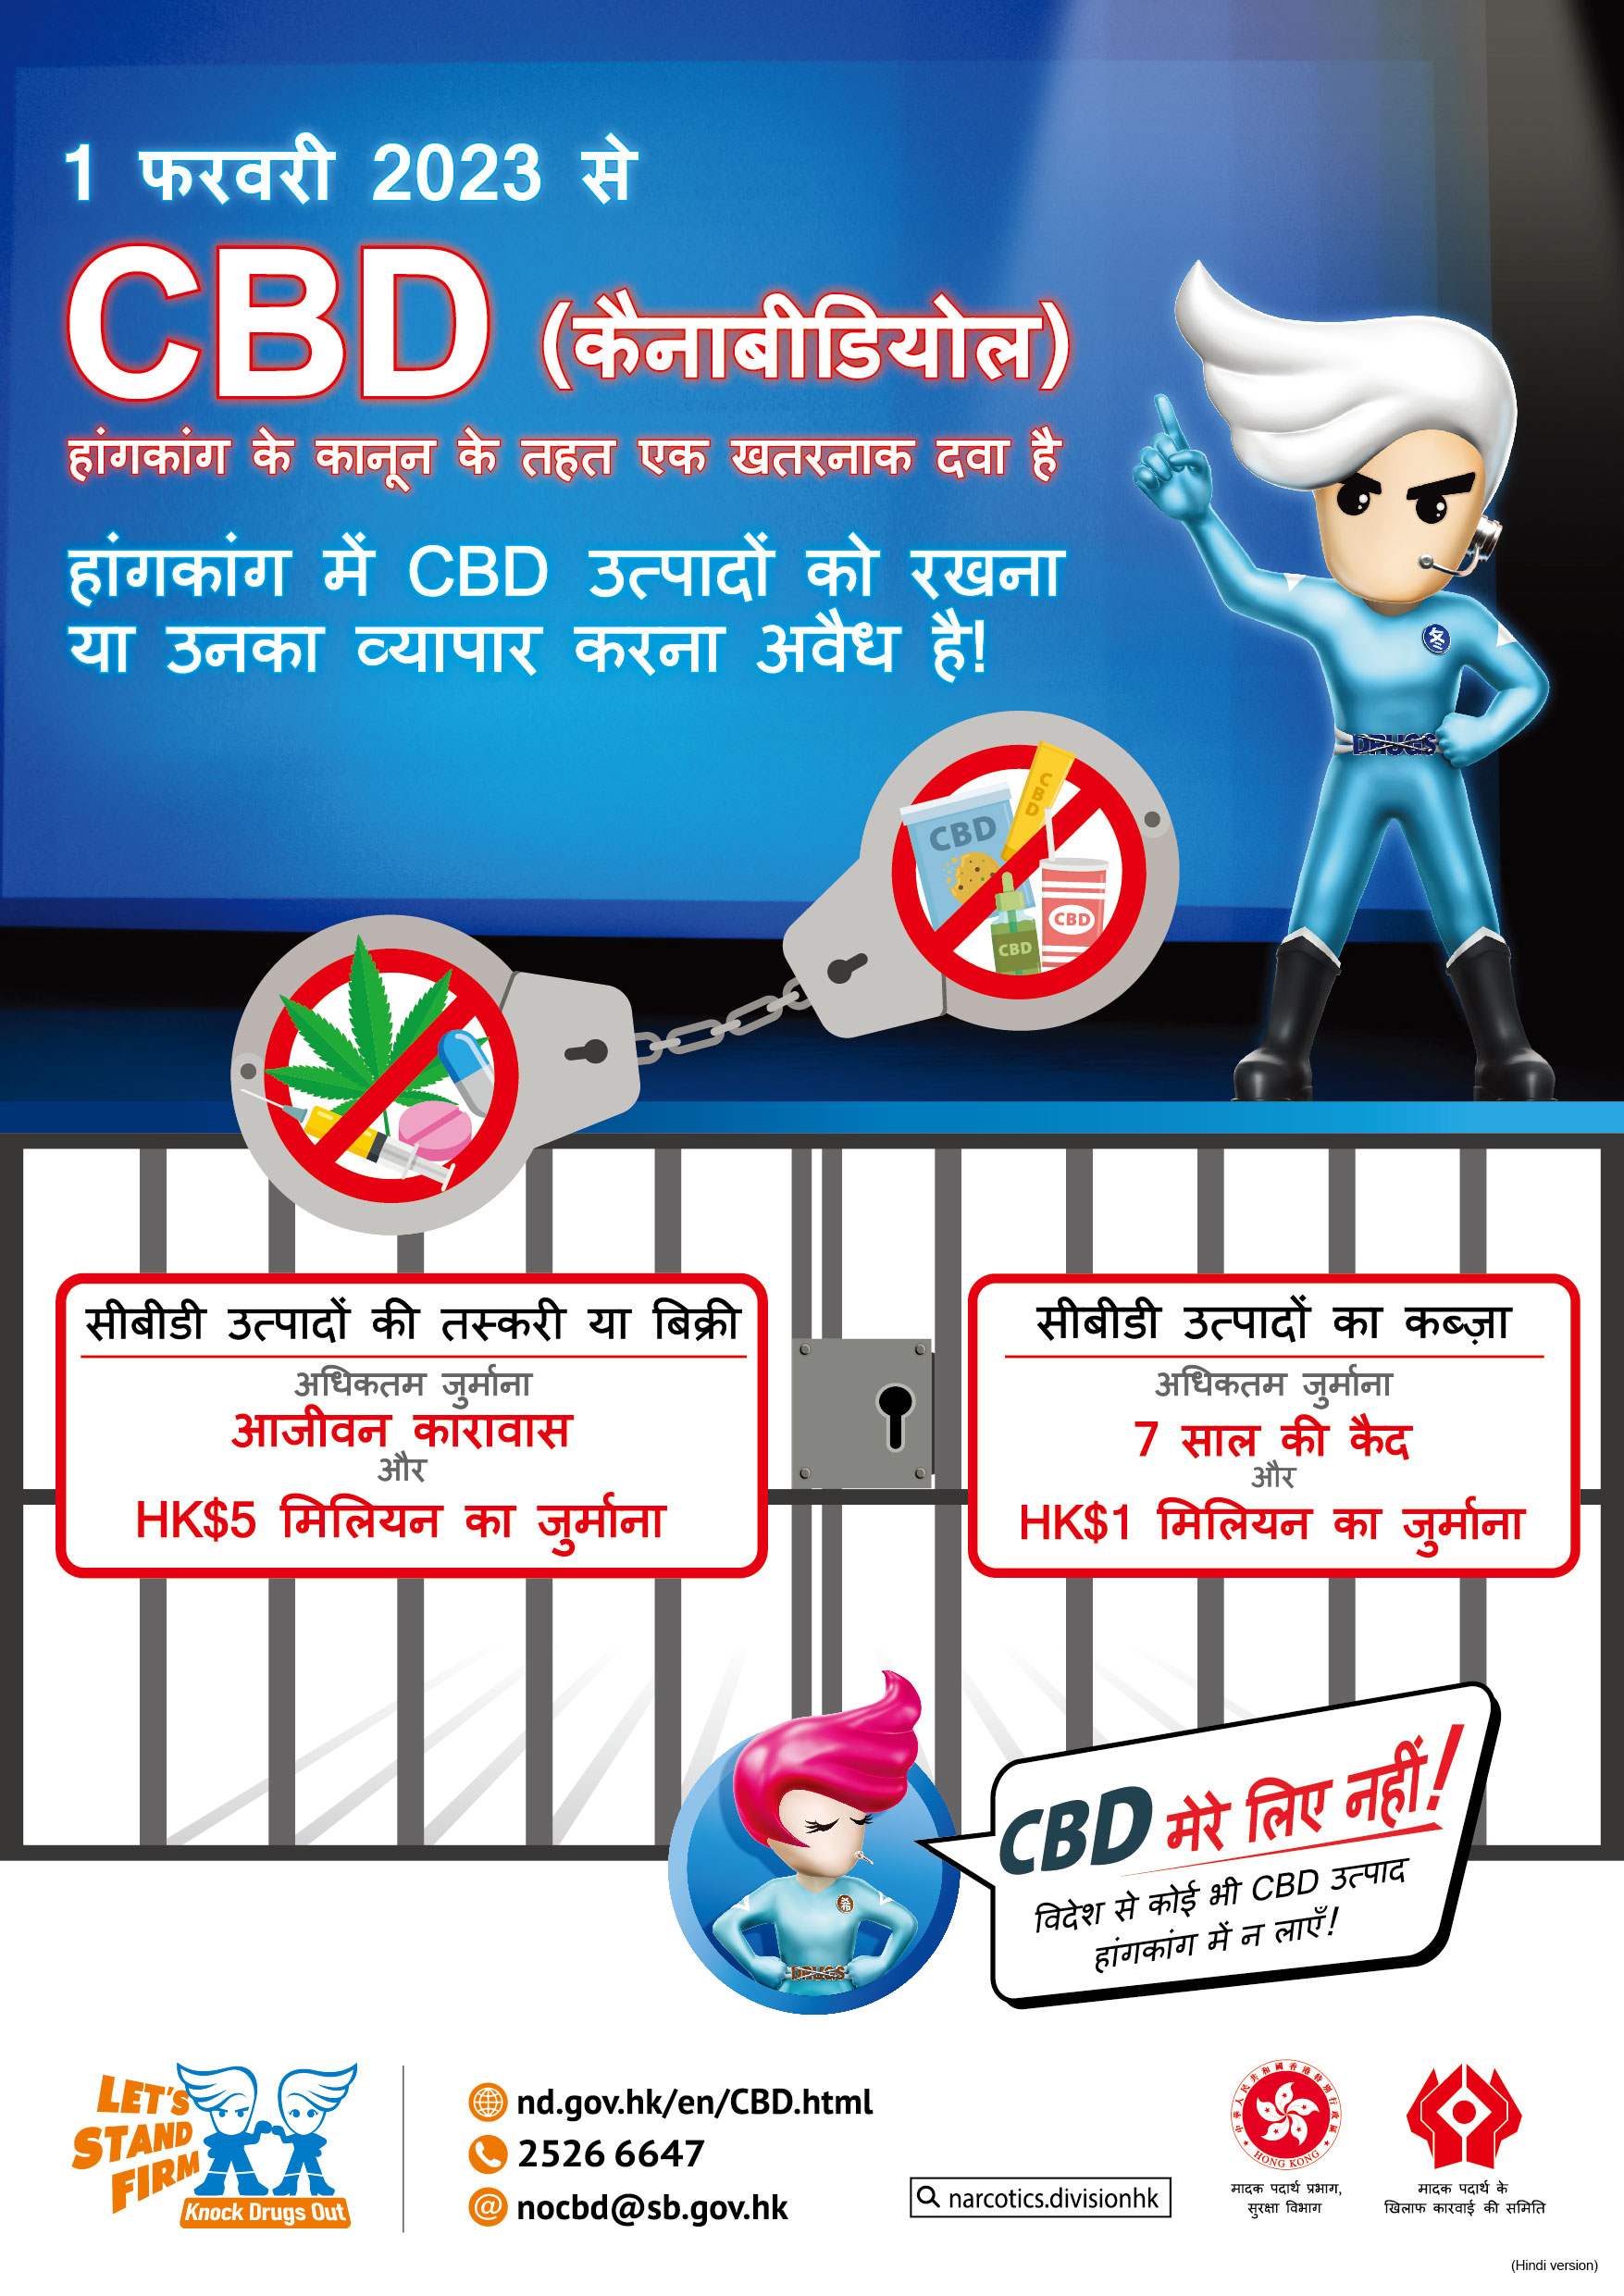 Anti-drug poster “CBD, Not for me! (Commencement of Law)” – Hindi version